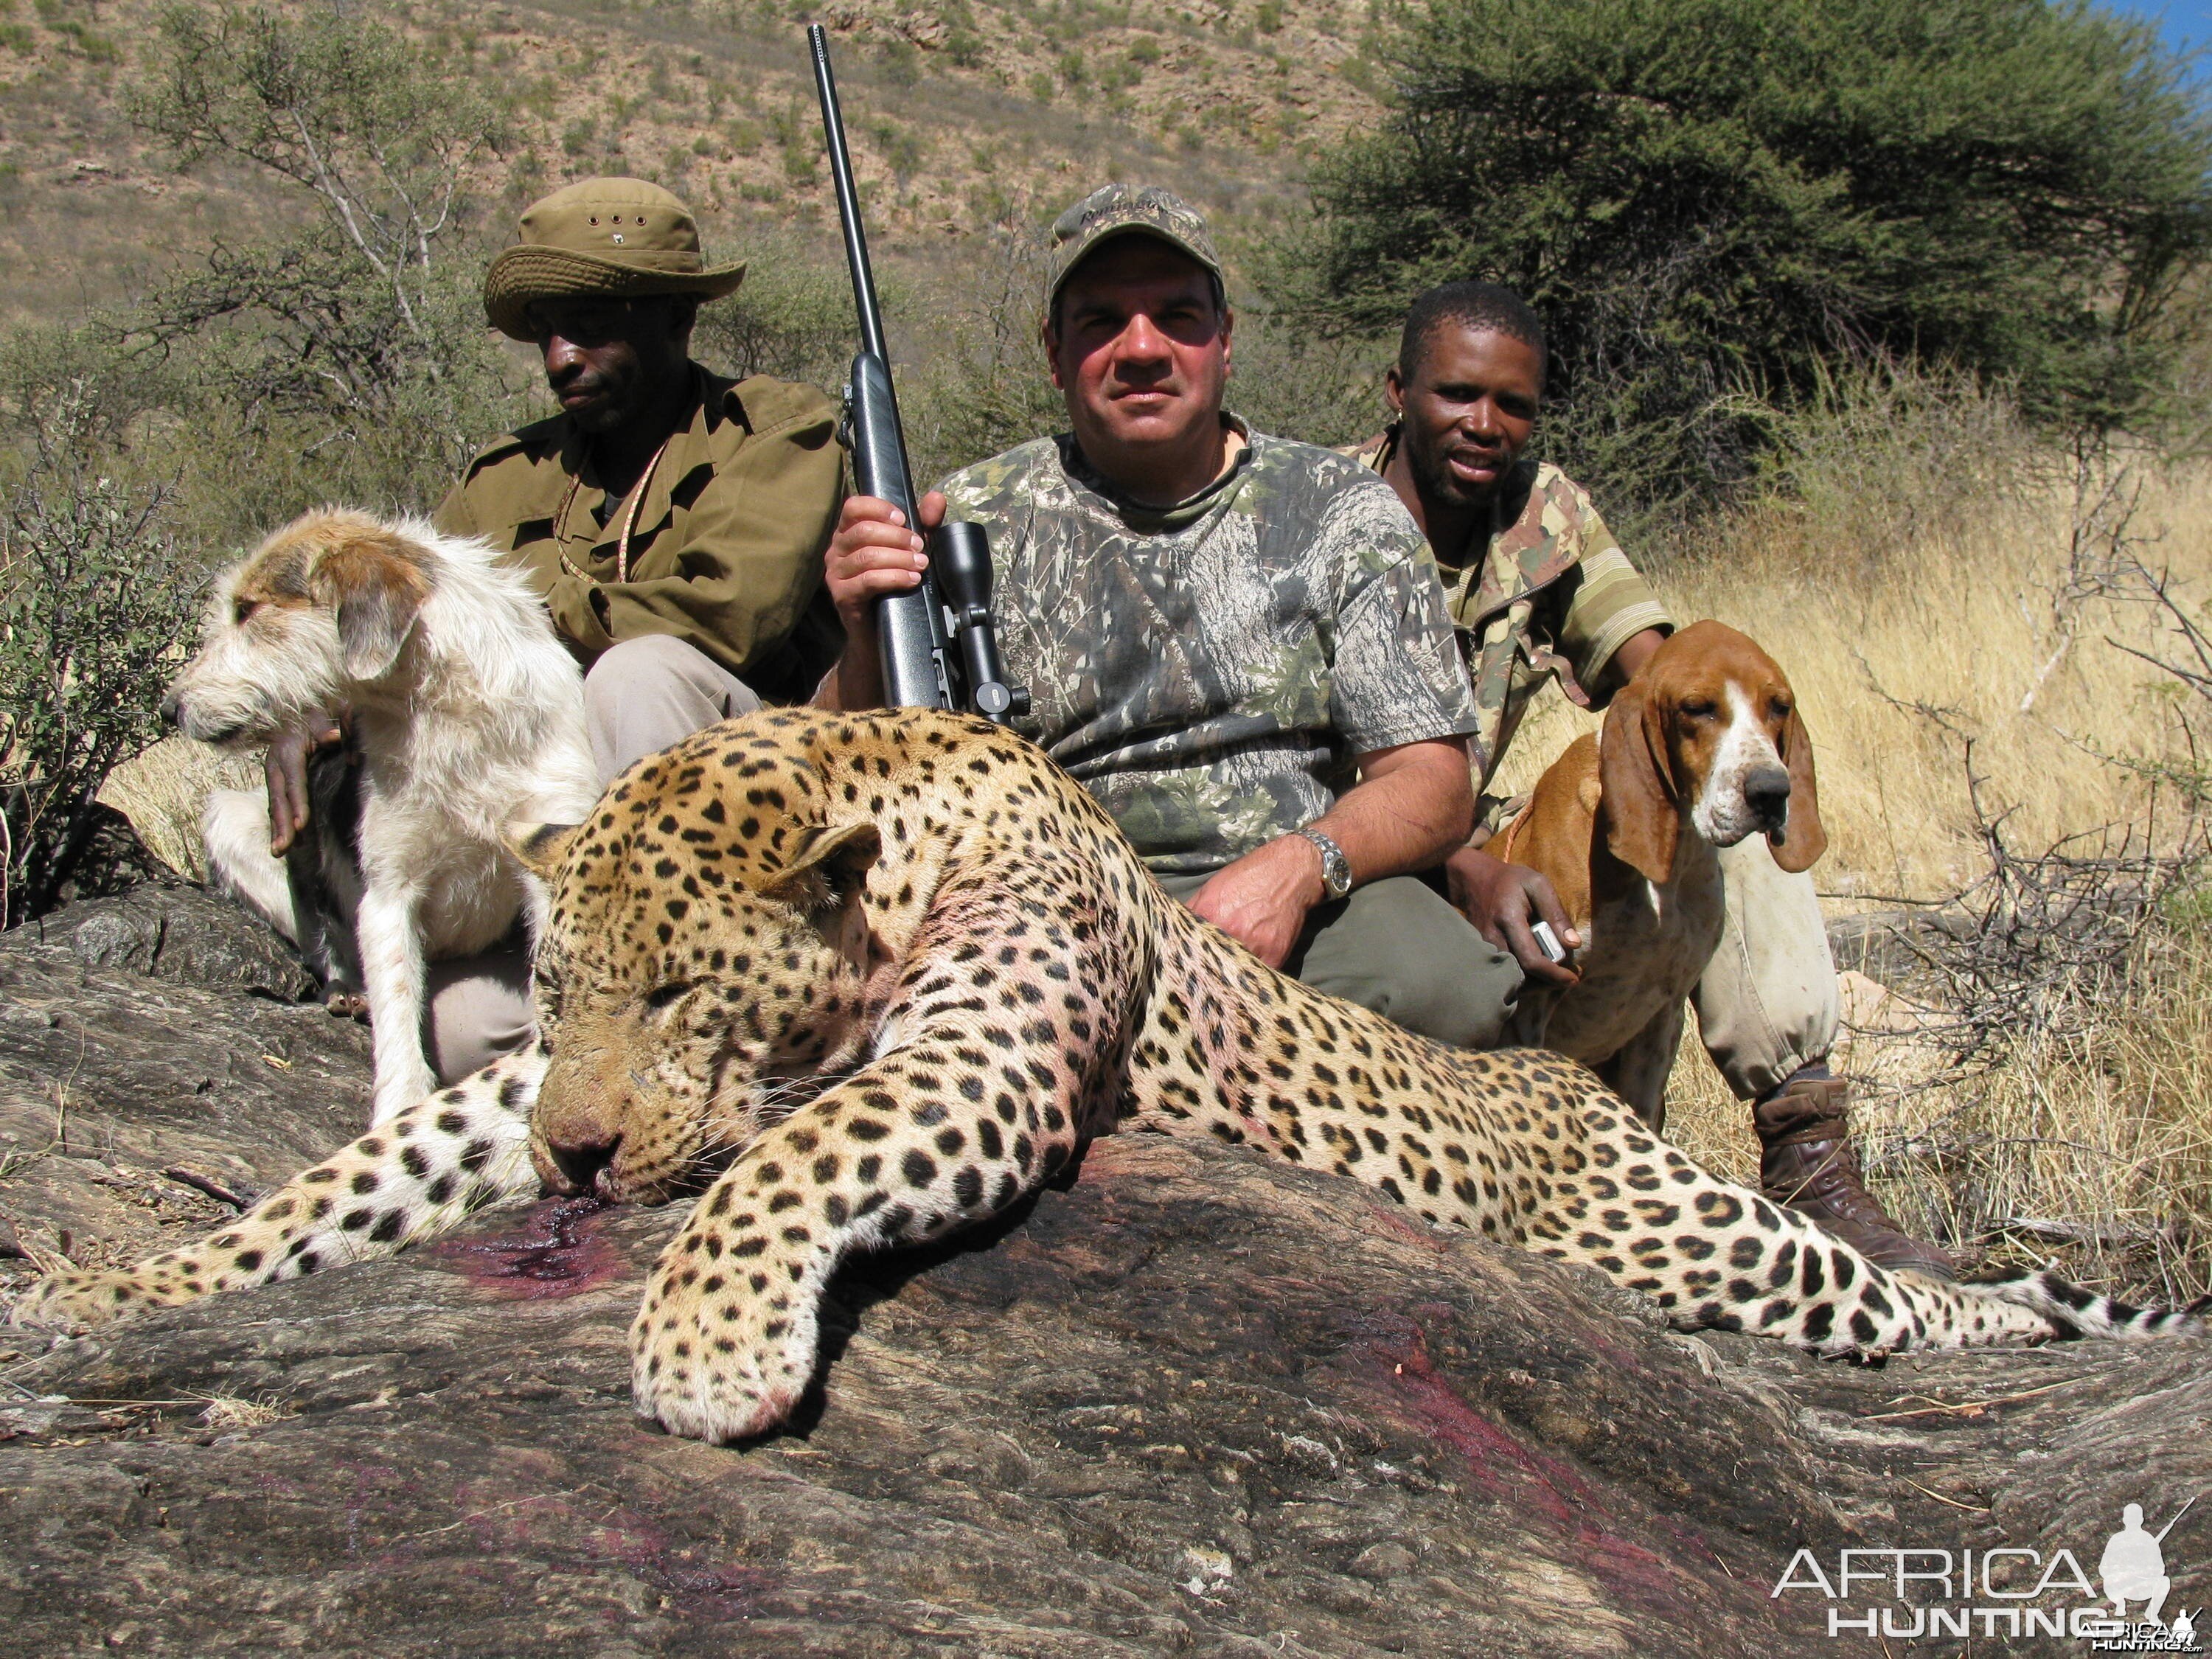 David Muti from Texas with record book leopard 2009